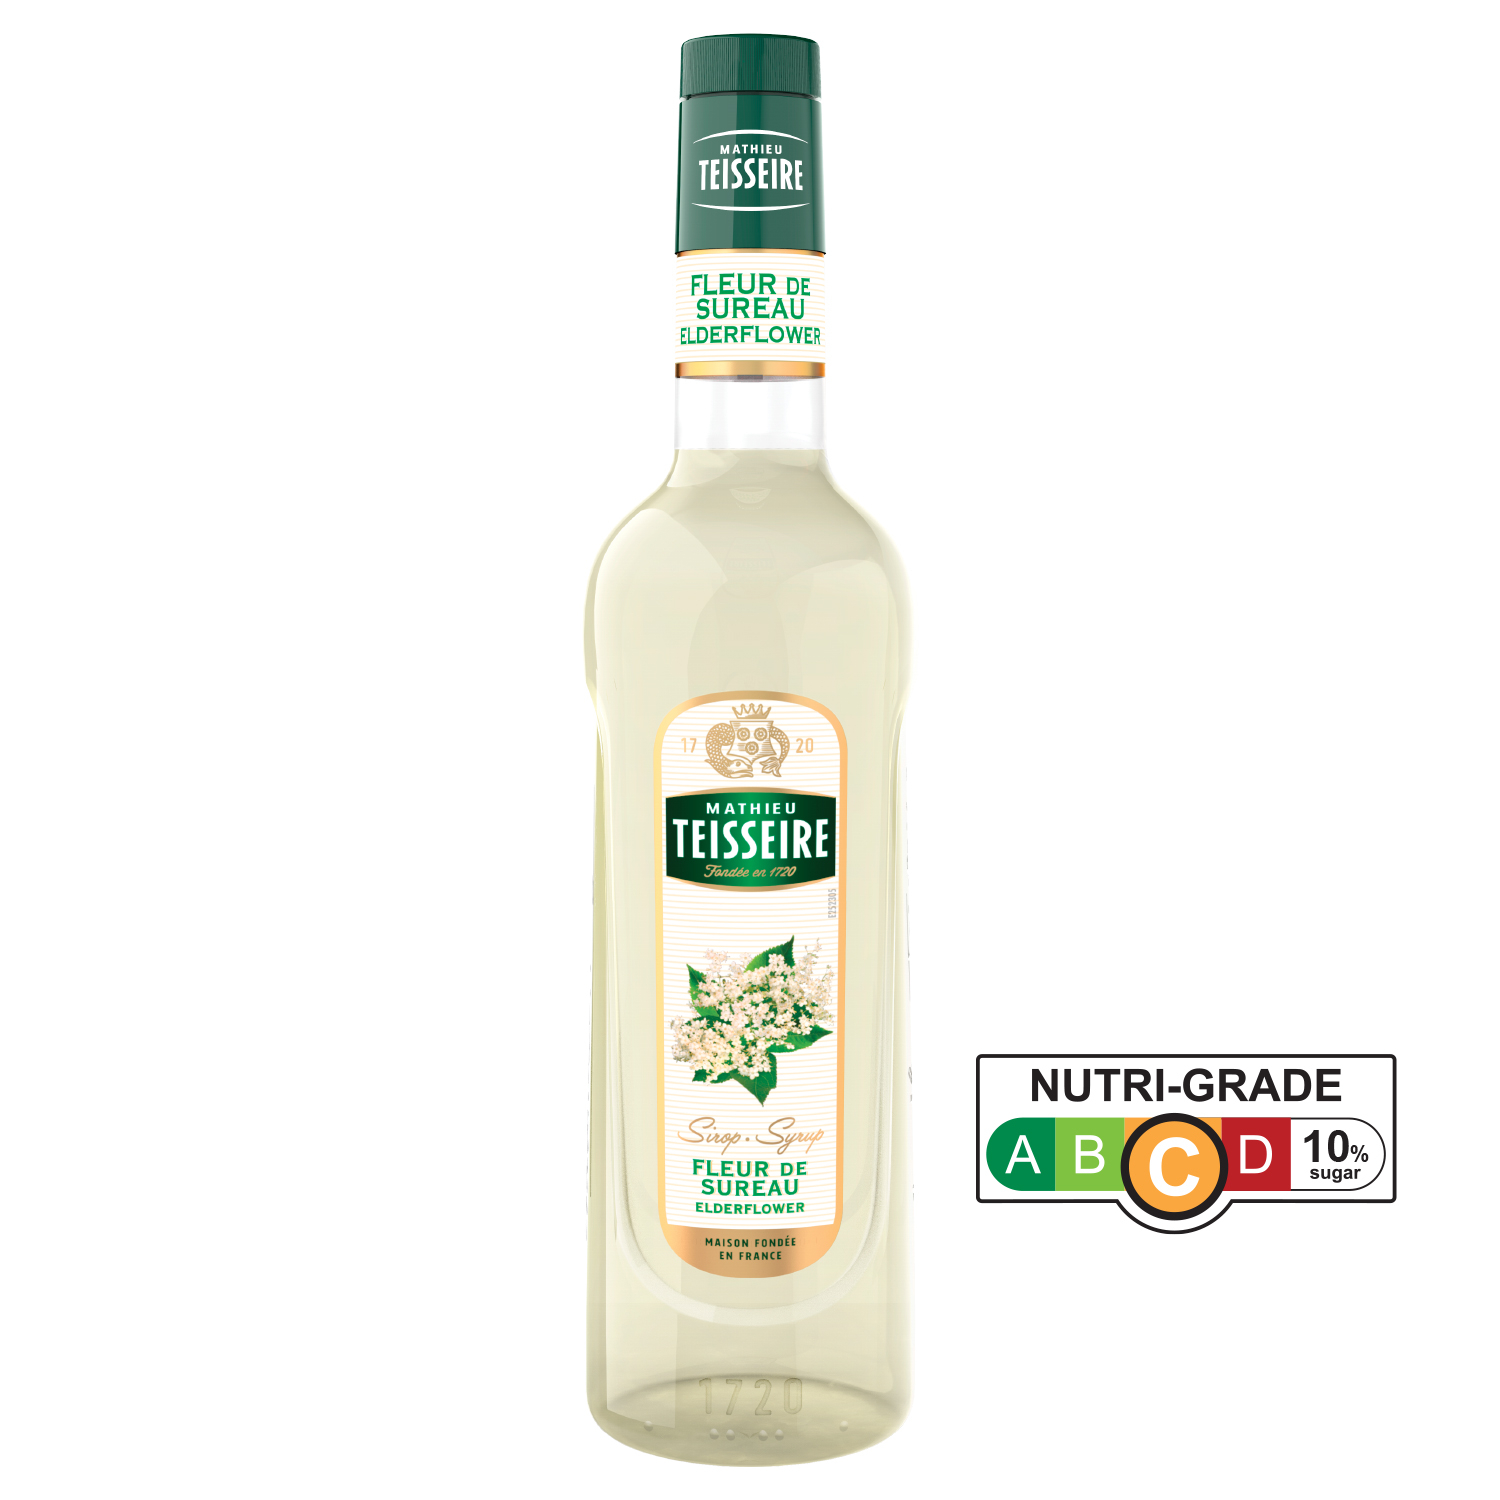 Mathieu Teisseire Herbs & Flowers Syrup Range